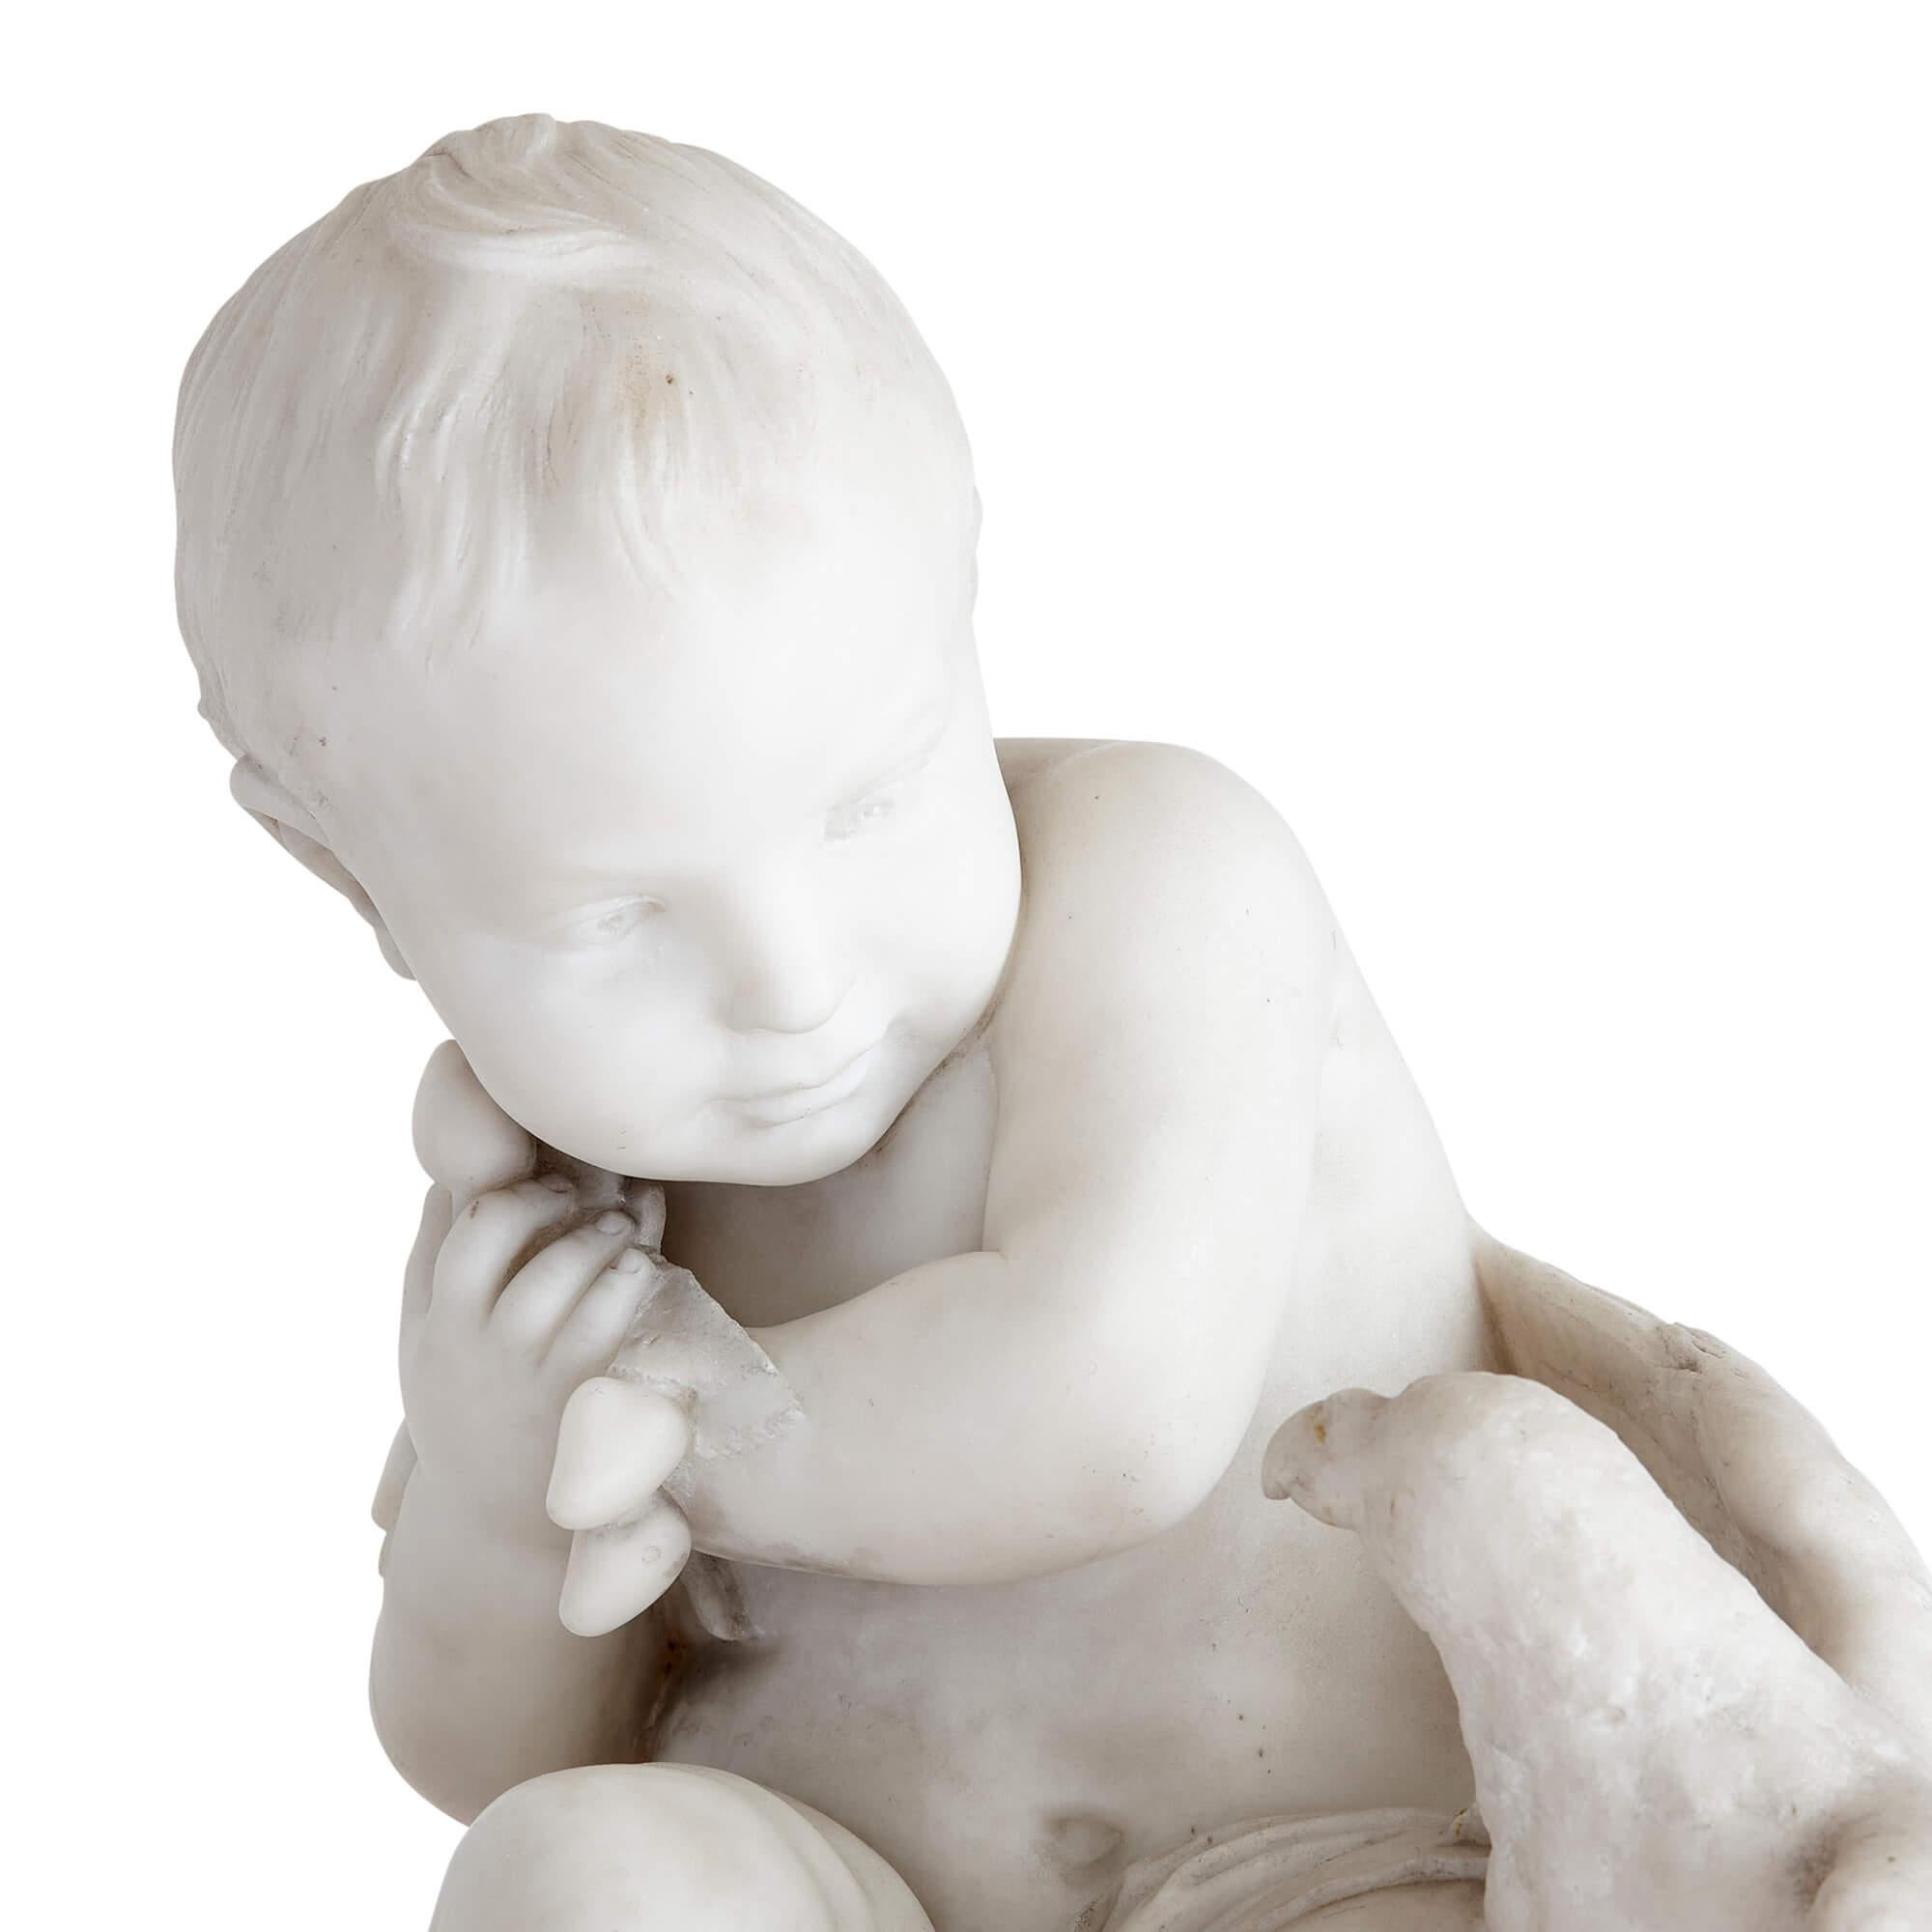 A 19th century marble sculpture of a putto and bird, signed 'Pigal'
French, 19th century
48cm high x 33cm wide x 37cm depth

Crafted in the nineteenth century in France this fine marble sculpture depicts a young cherub, or boy or putto,